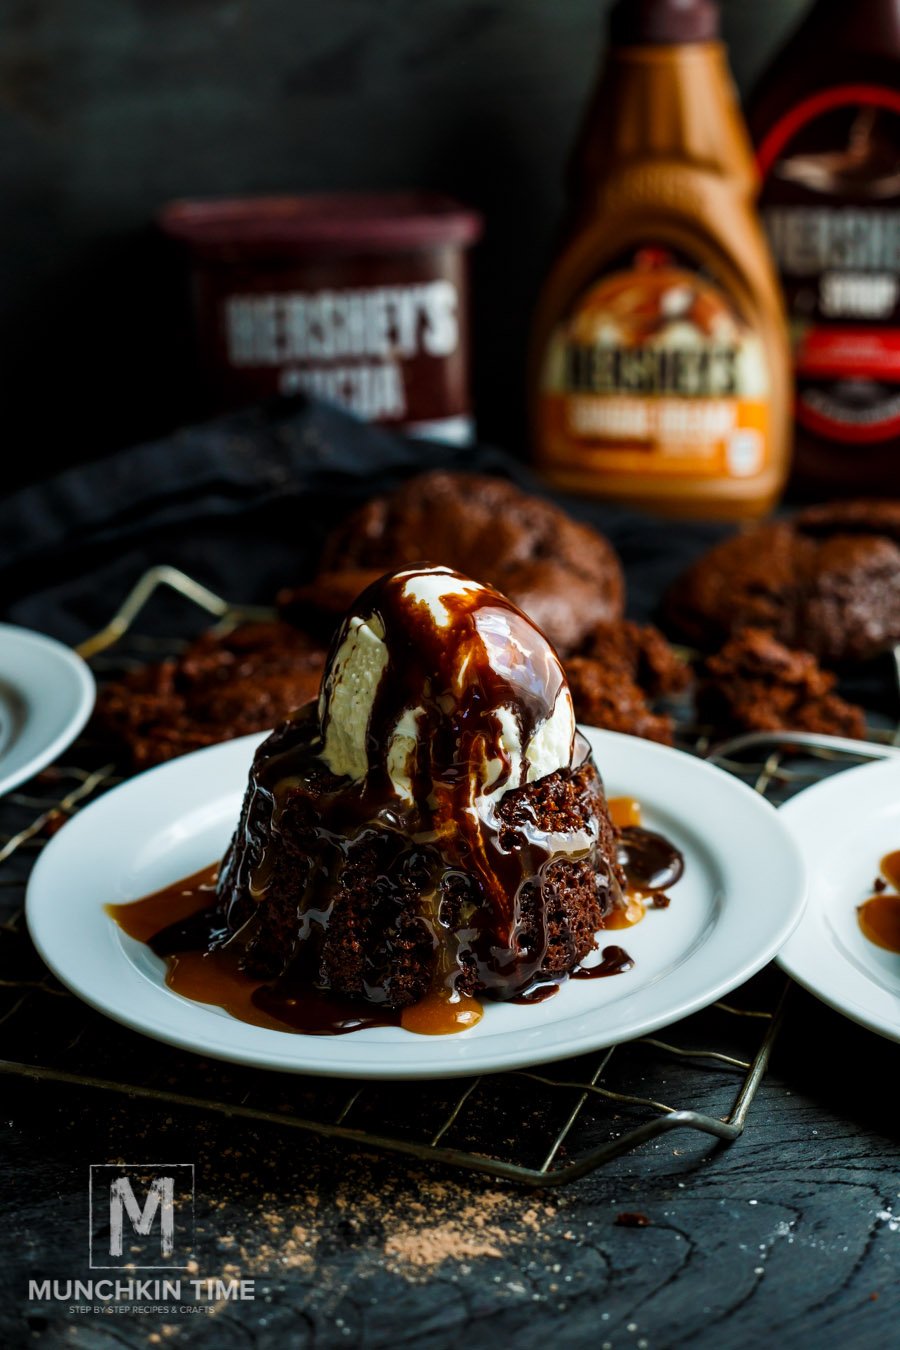 The Best Chocolate Cake a.k.a Molten Lava Cake